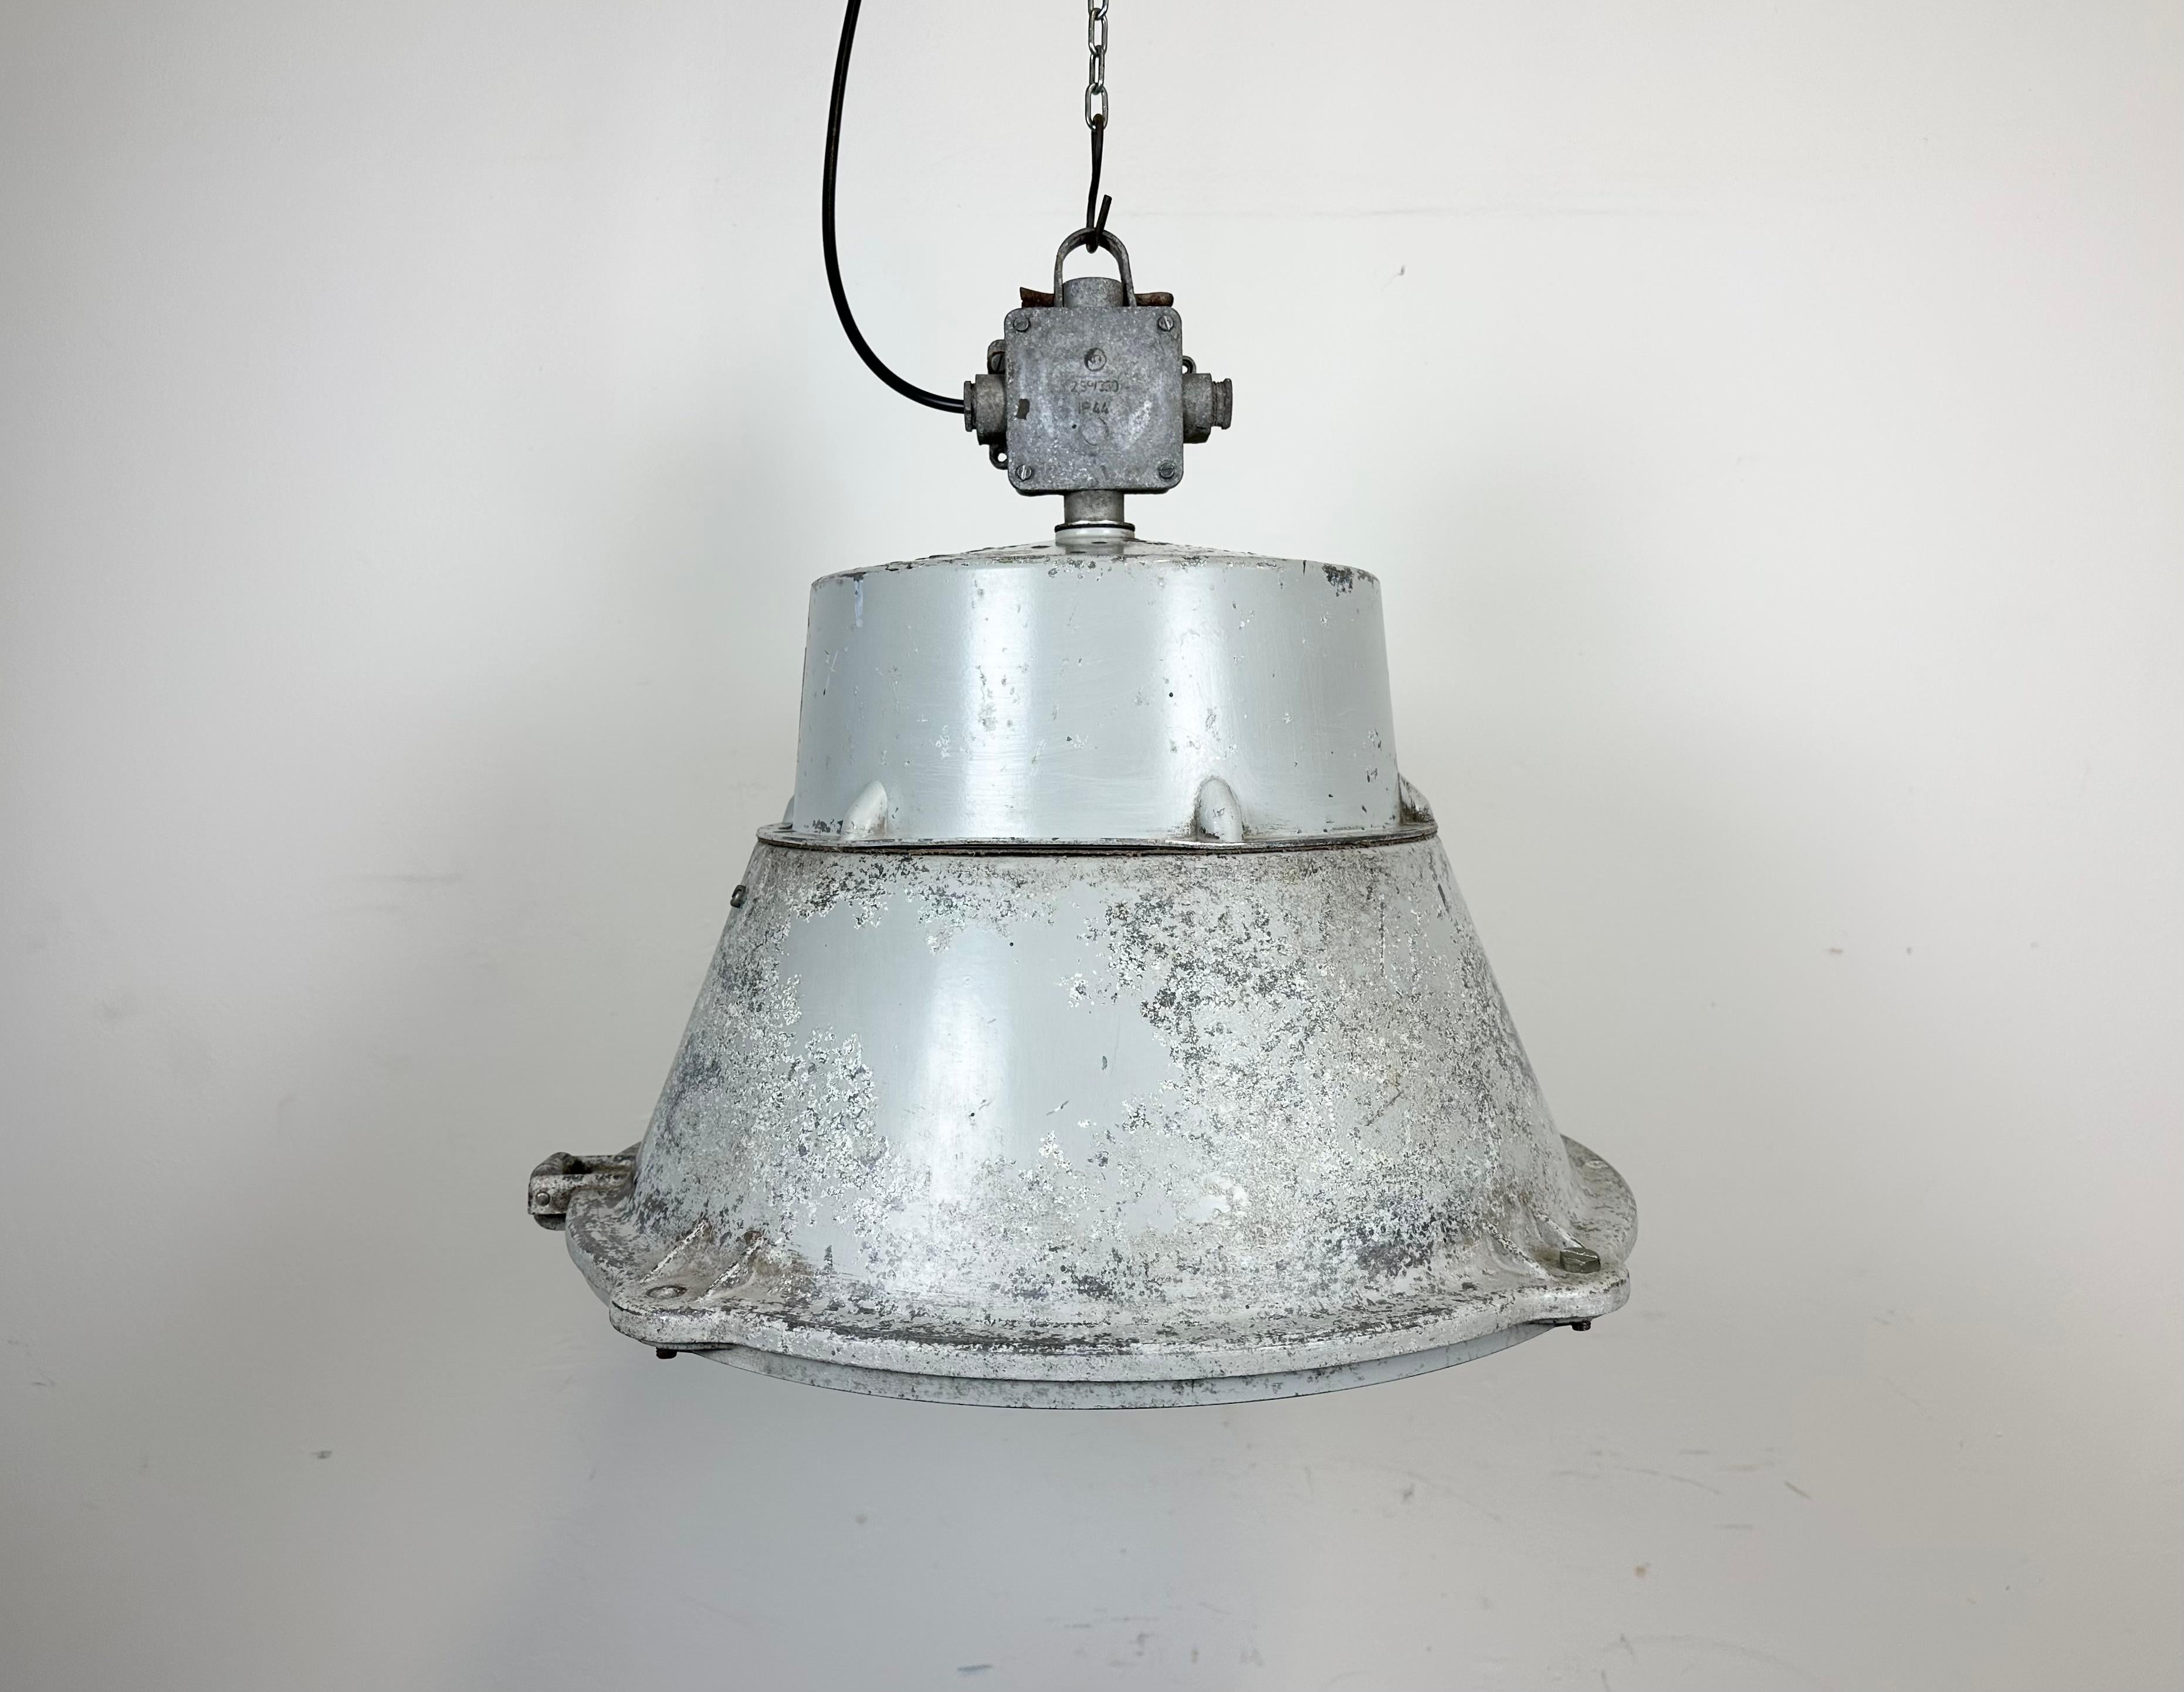 Vintage industrial hanging lamp manufactured in 1970s by MESKO in Skarzysko-Kamienna in Poland. It features a grey cast aluminium body and top. The original porcelain socket E 40 is equipped with an adapter from E40 to E27 and requires E 27/ E 26